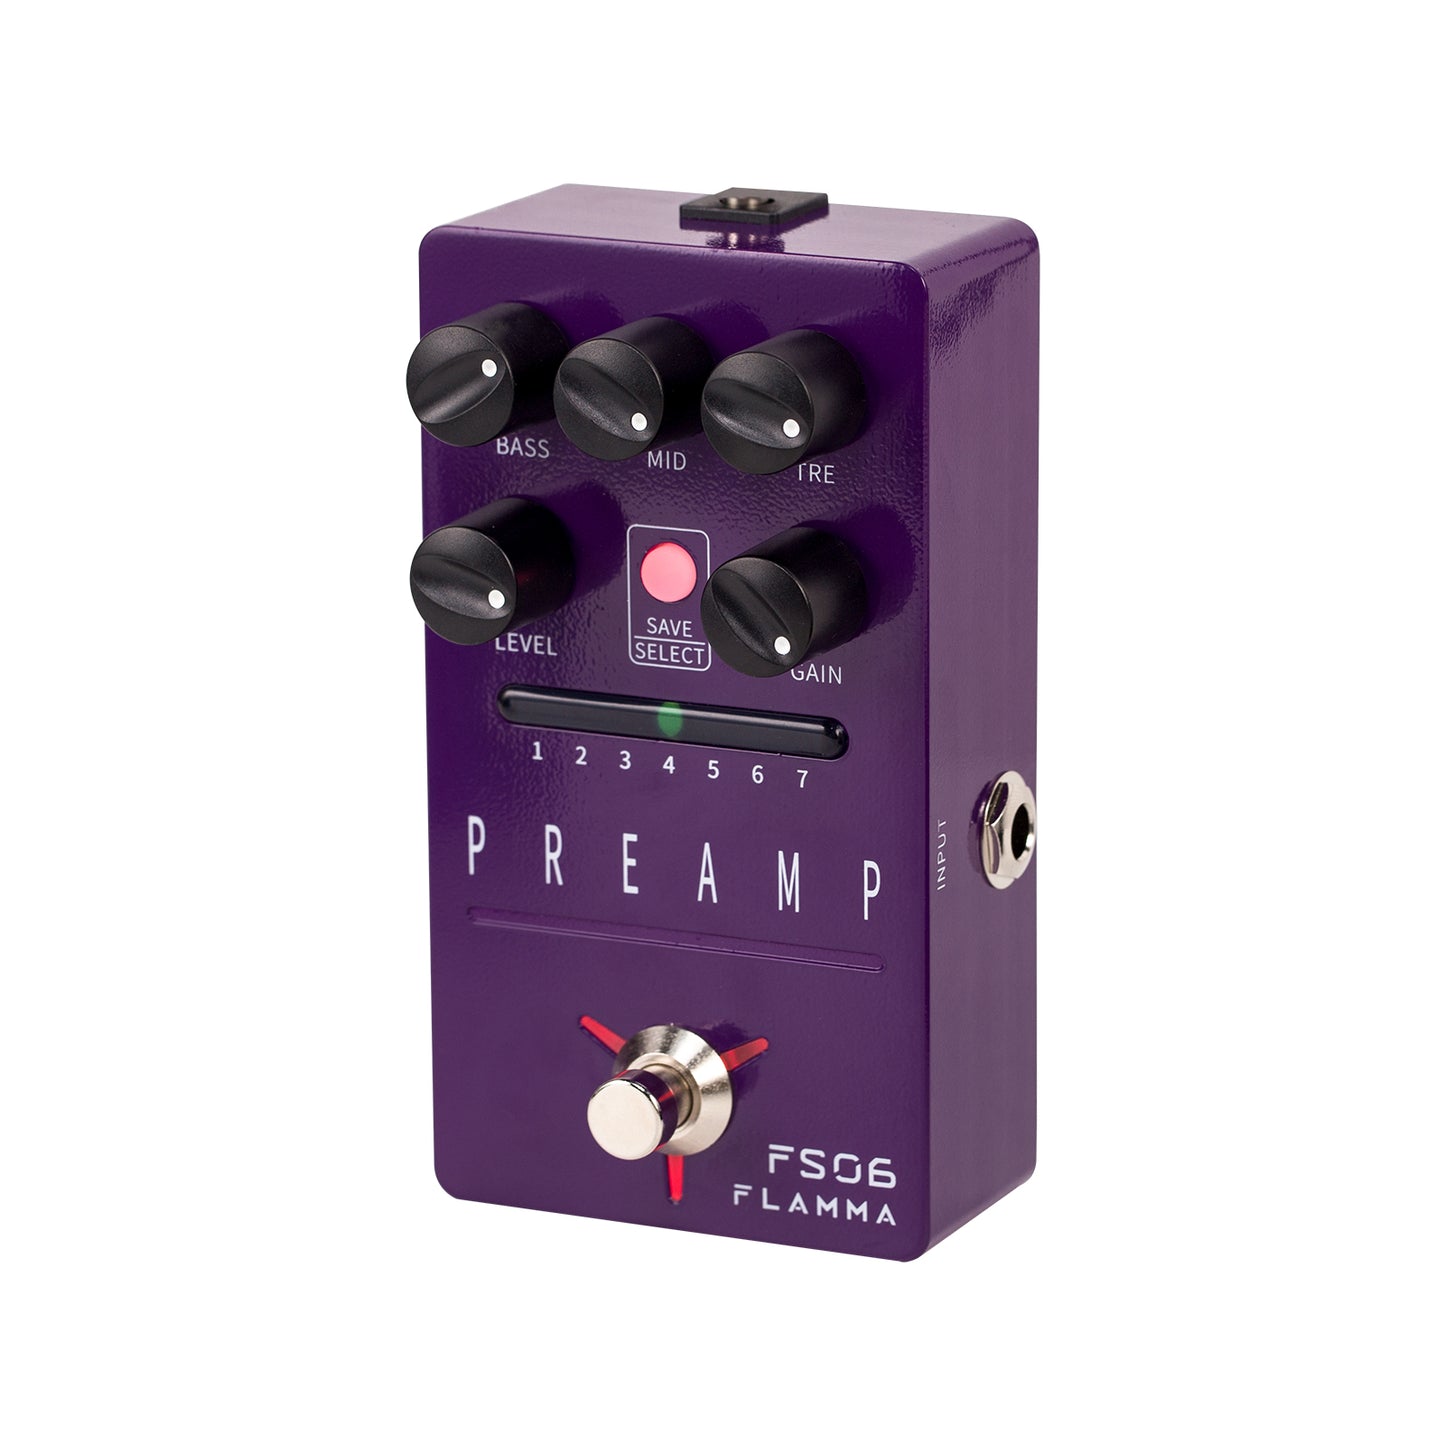 FLAMMA FS06 Digital Preamp with 7 Different Preamp Models